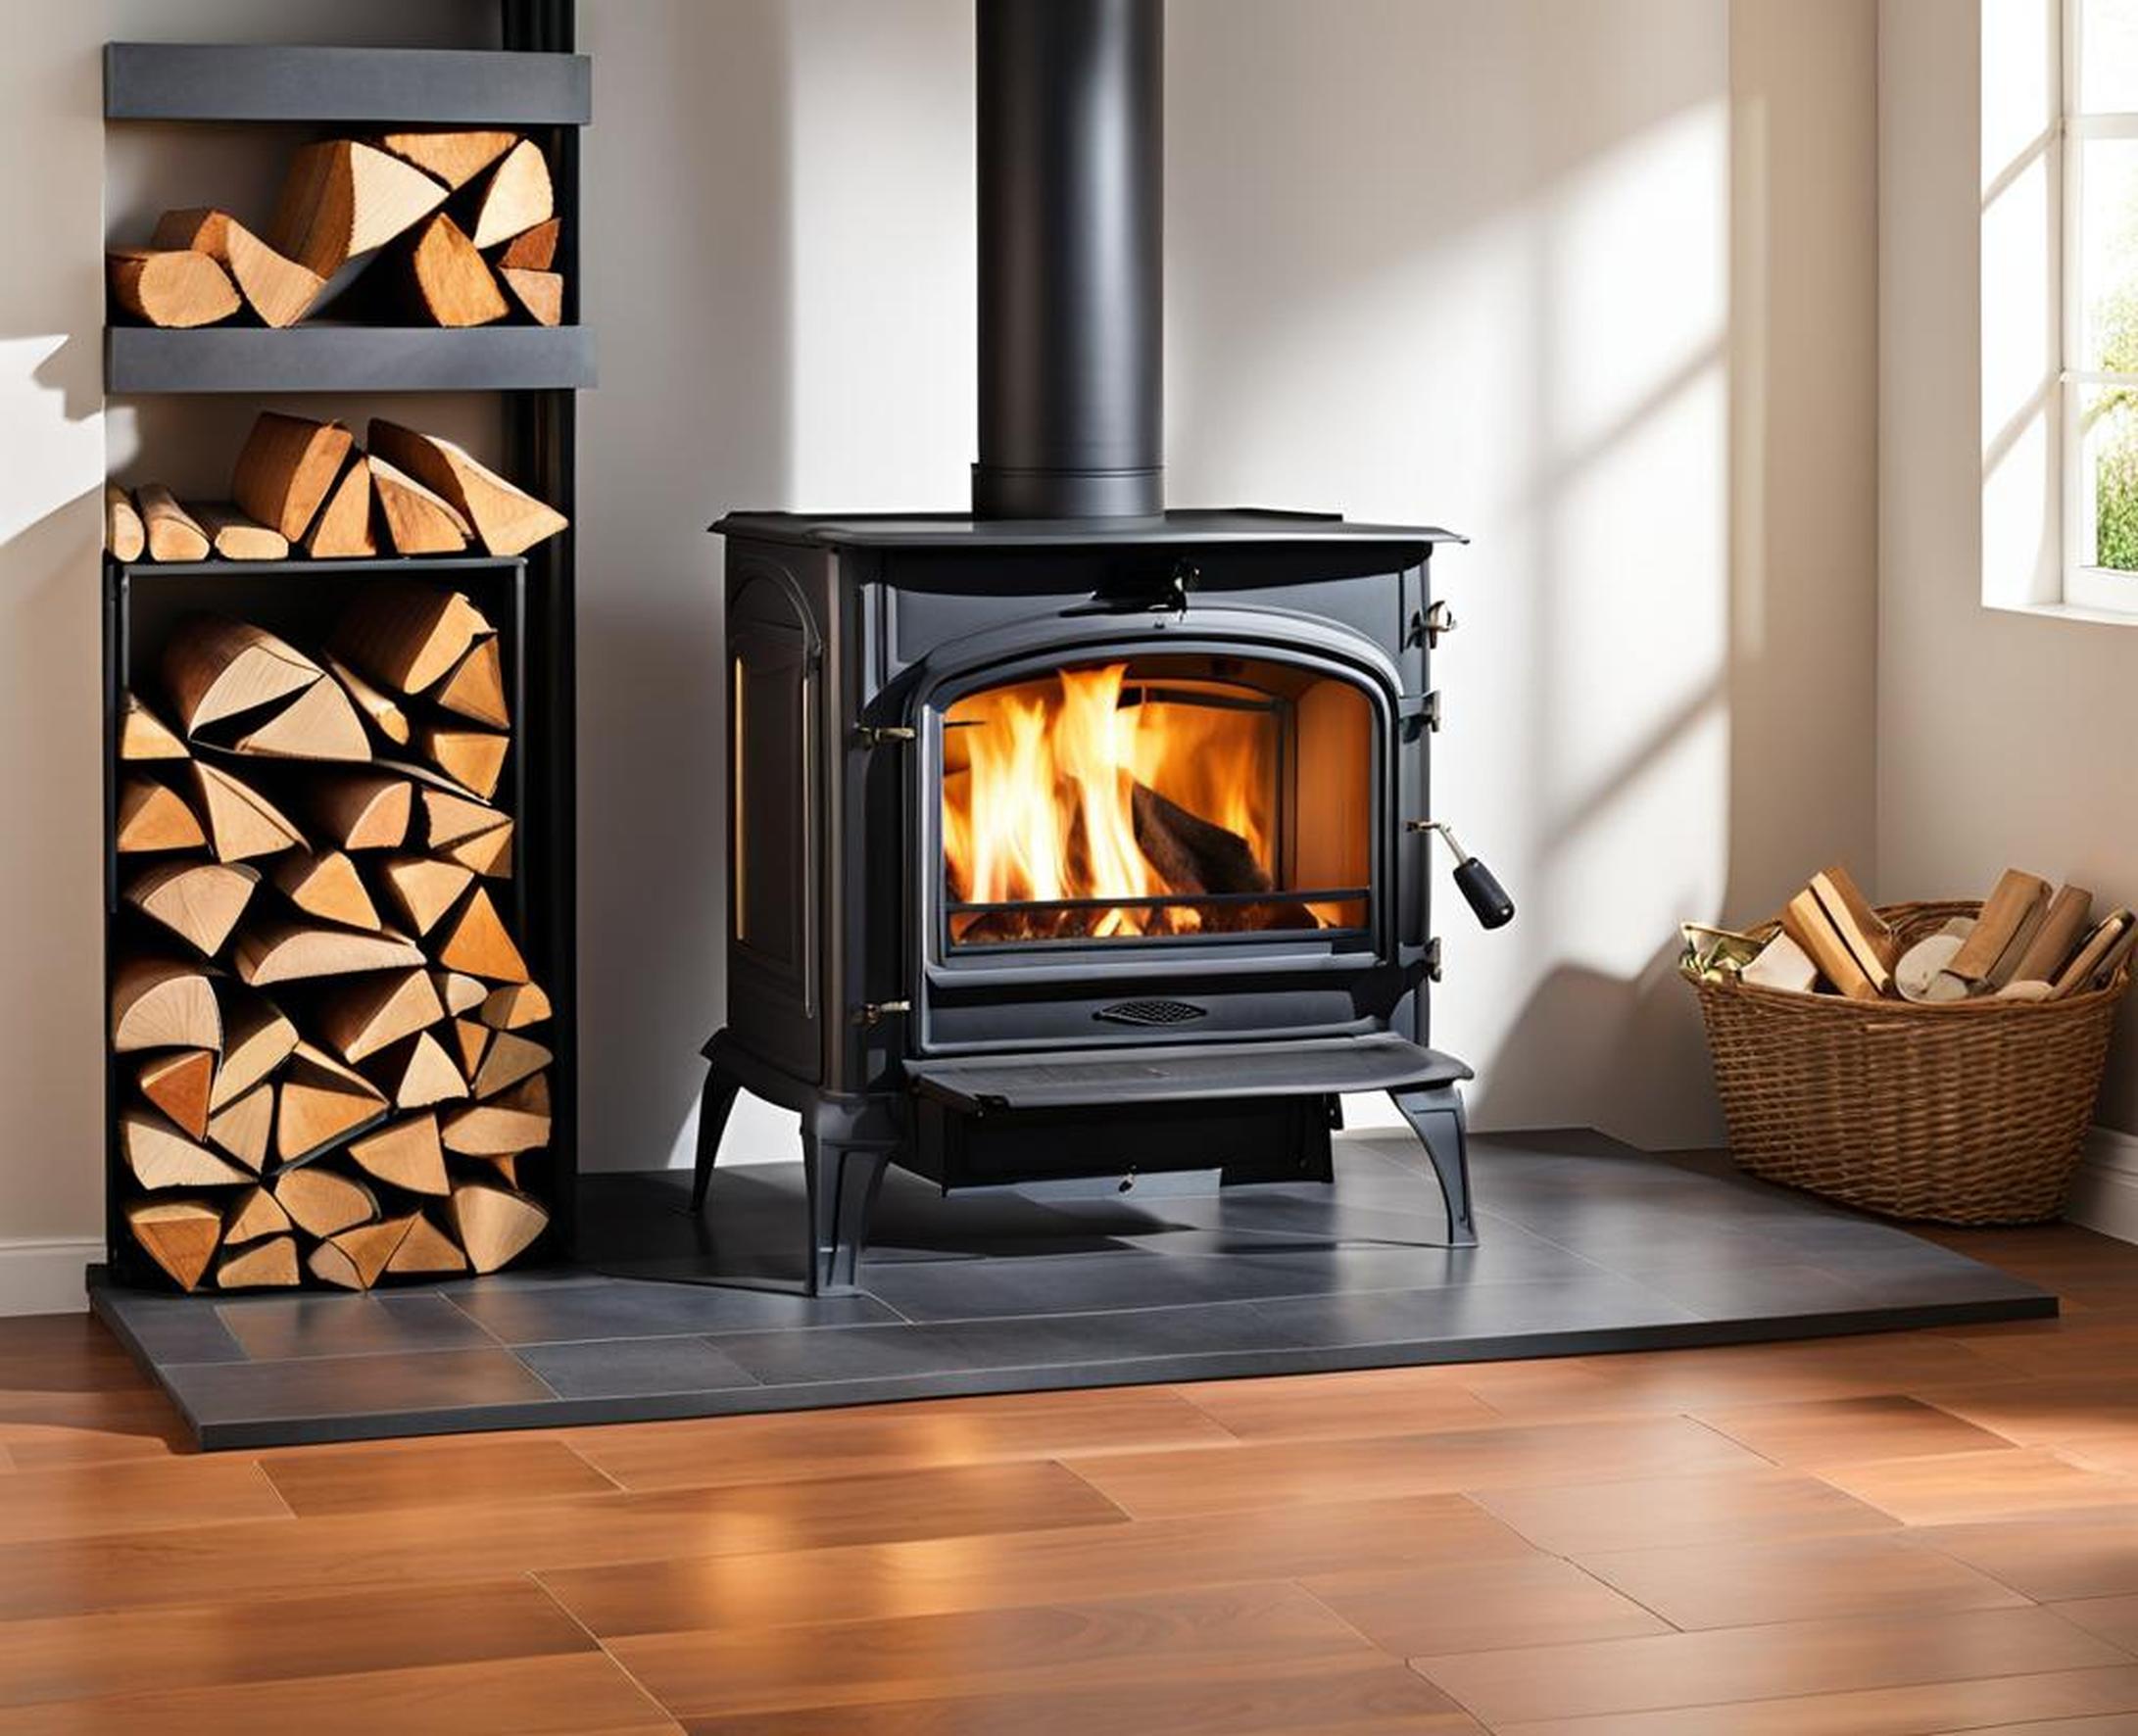 installing wood stove in fireplace